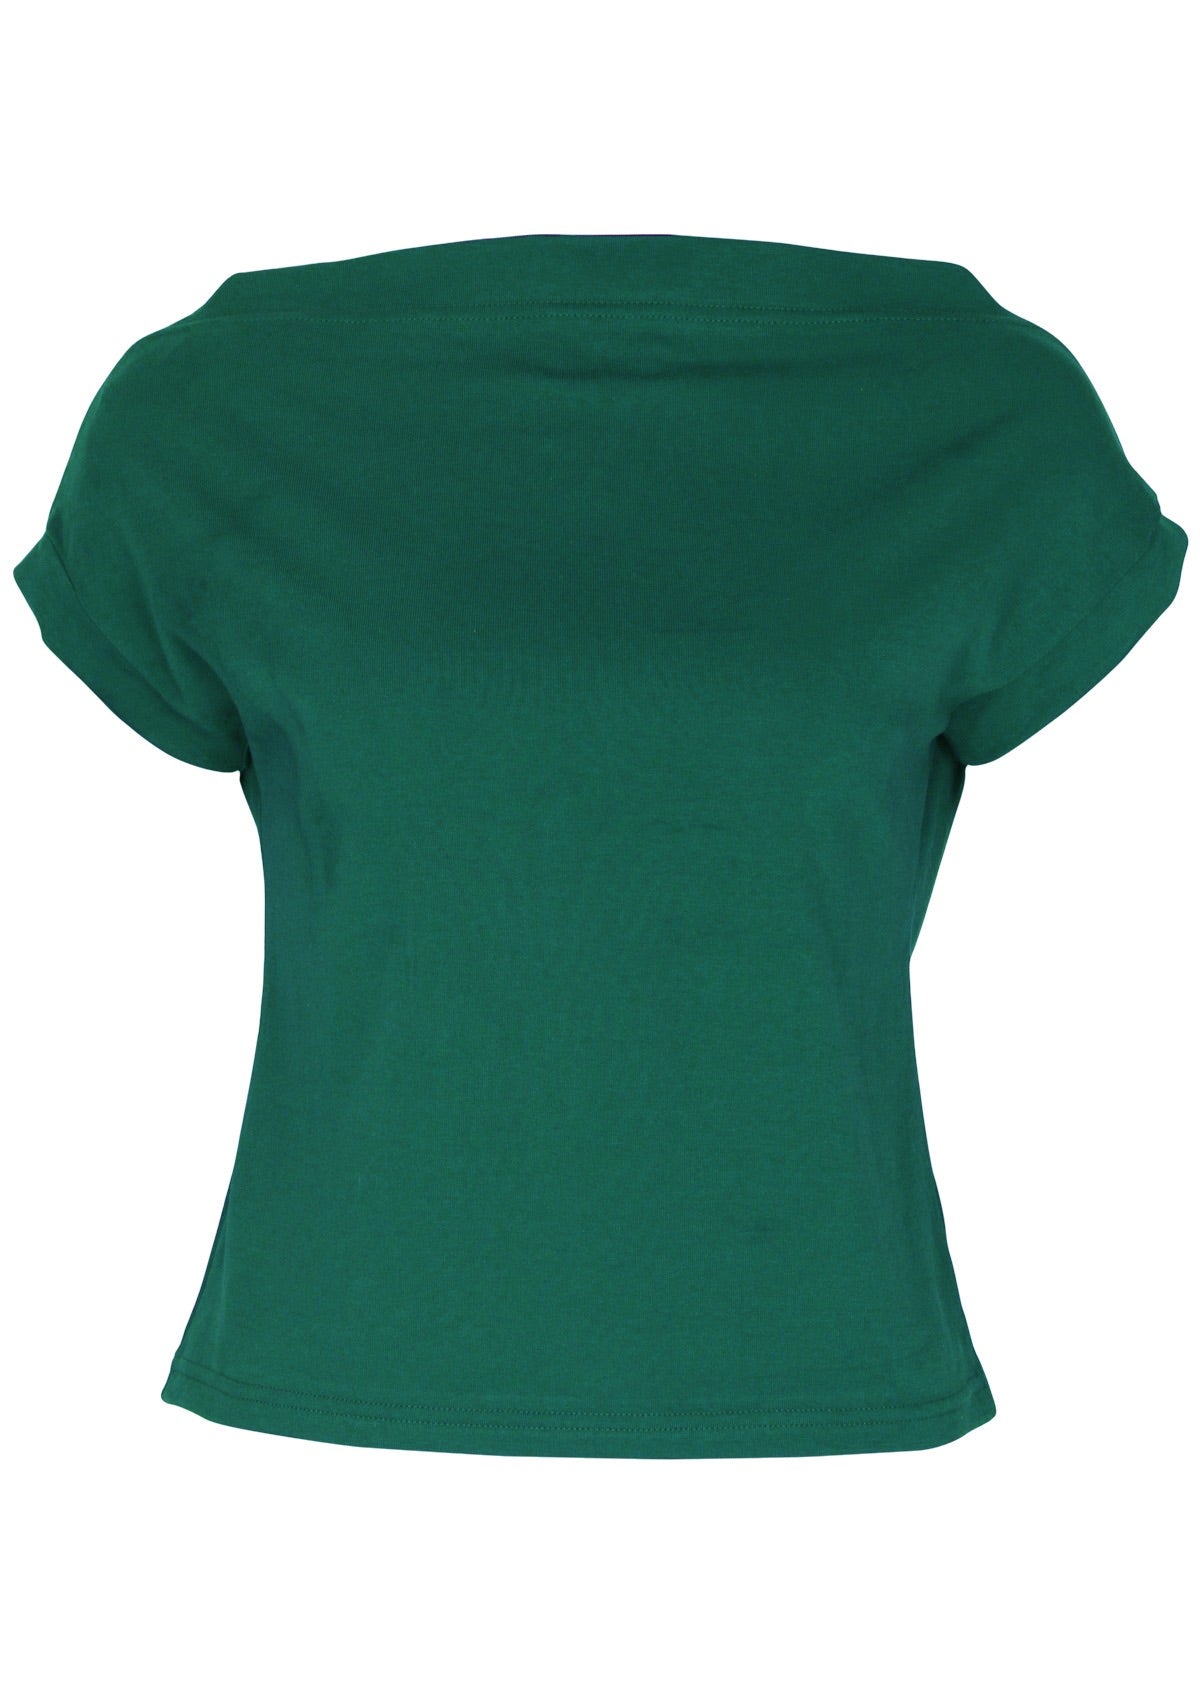 Front view of a women's wide neck mod green stretch rayon boat neck top